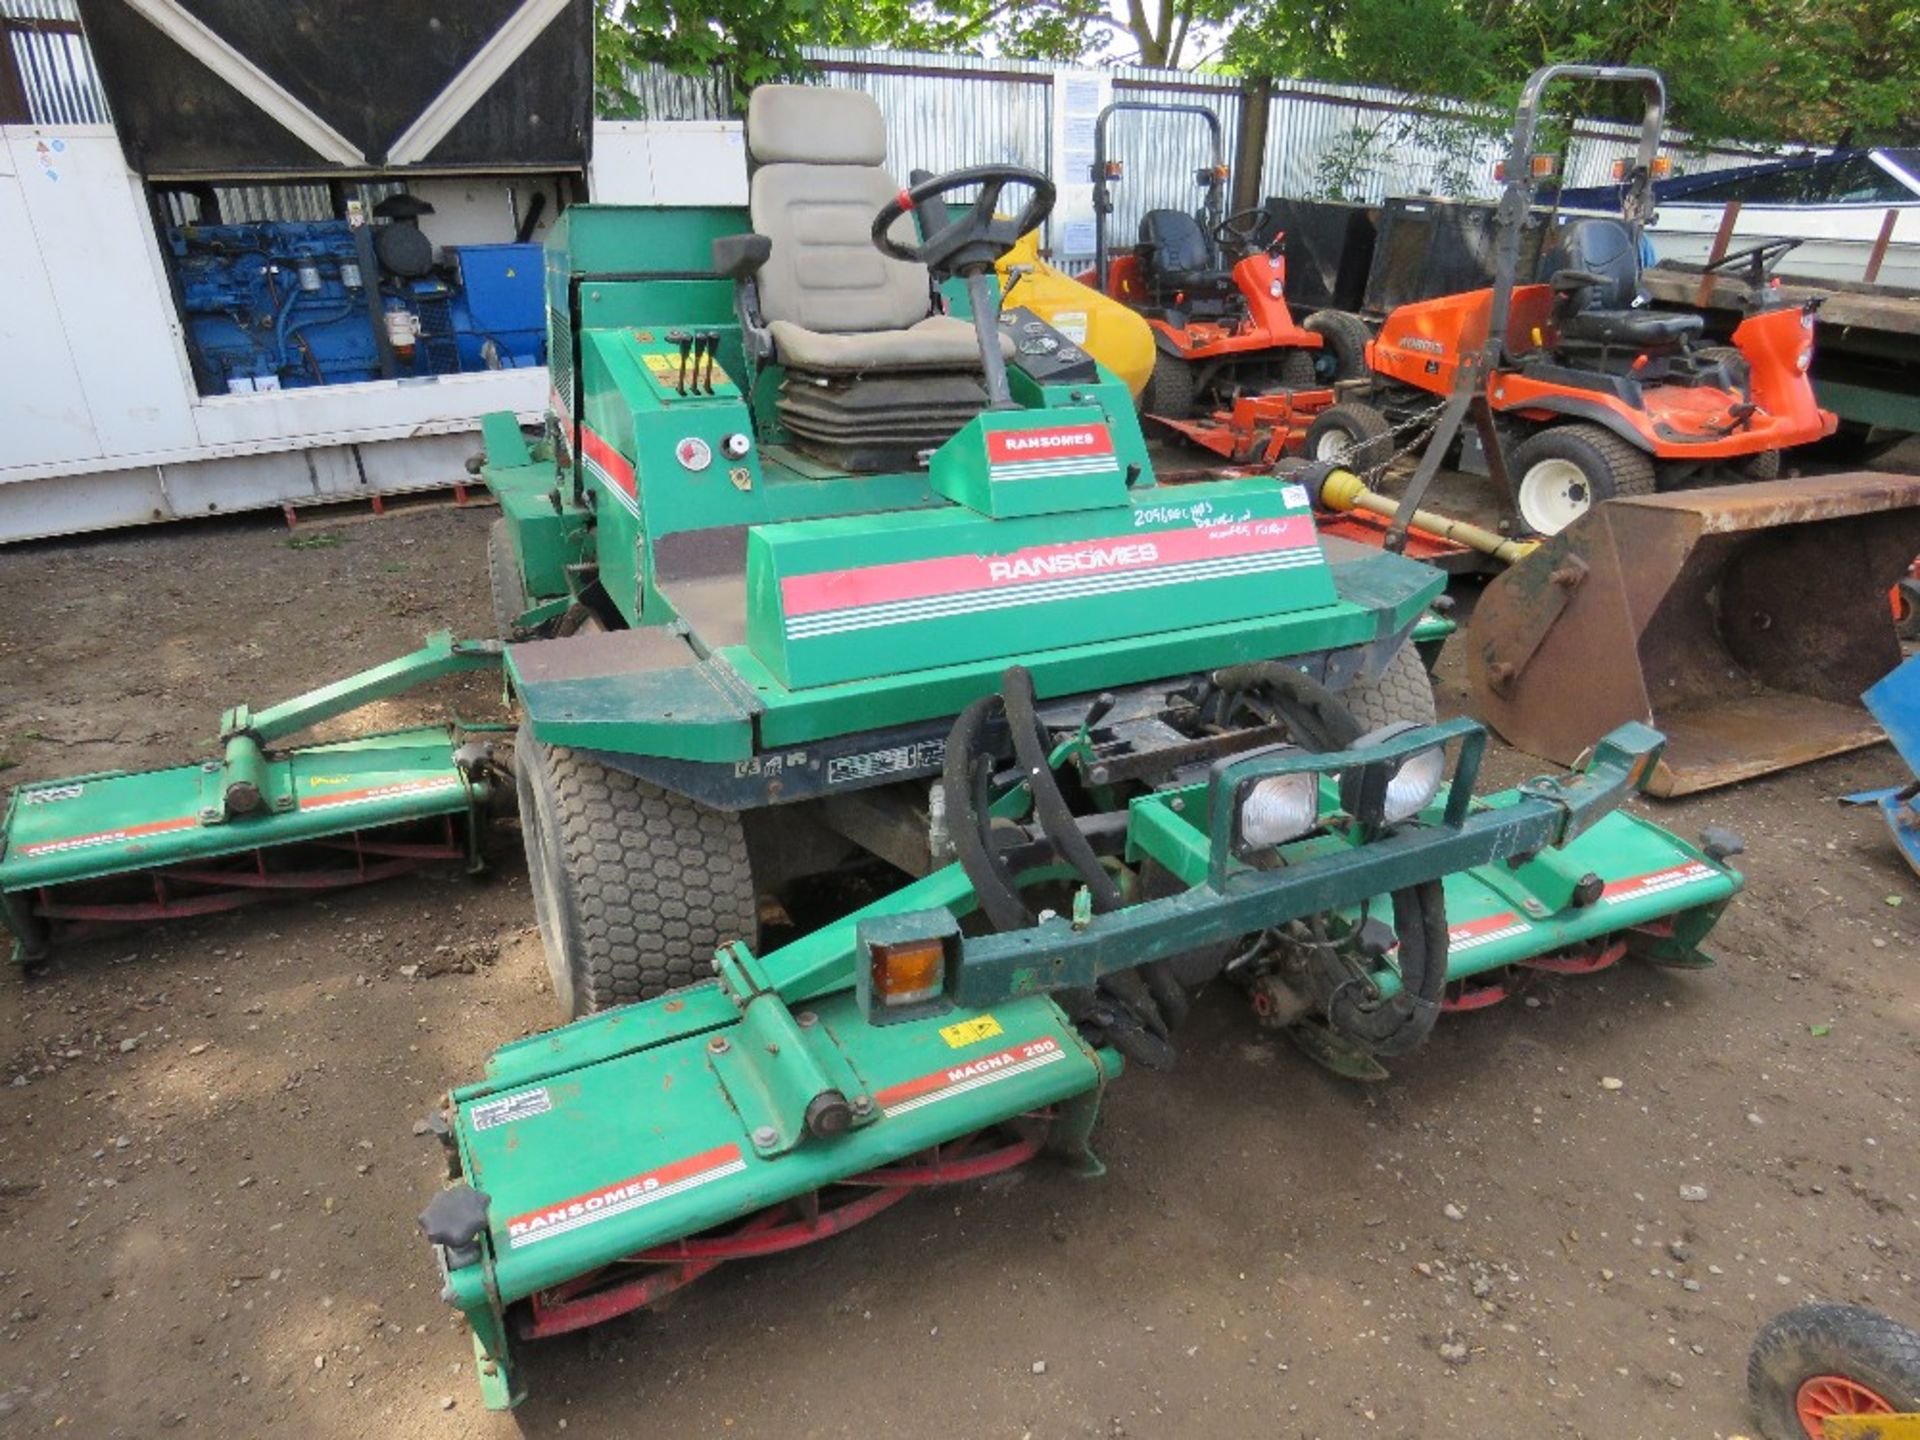 RANSOMES 3510 COMMANDER 5 GANG MOWER 51HP, 2096 REC HRS WHEN TESTED WAS SEEN TO DRIVE, STEER,